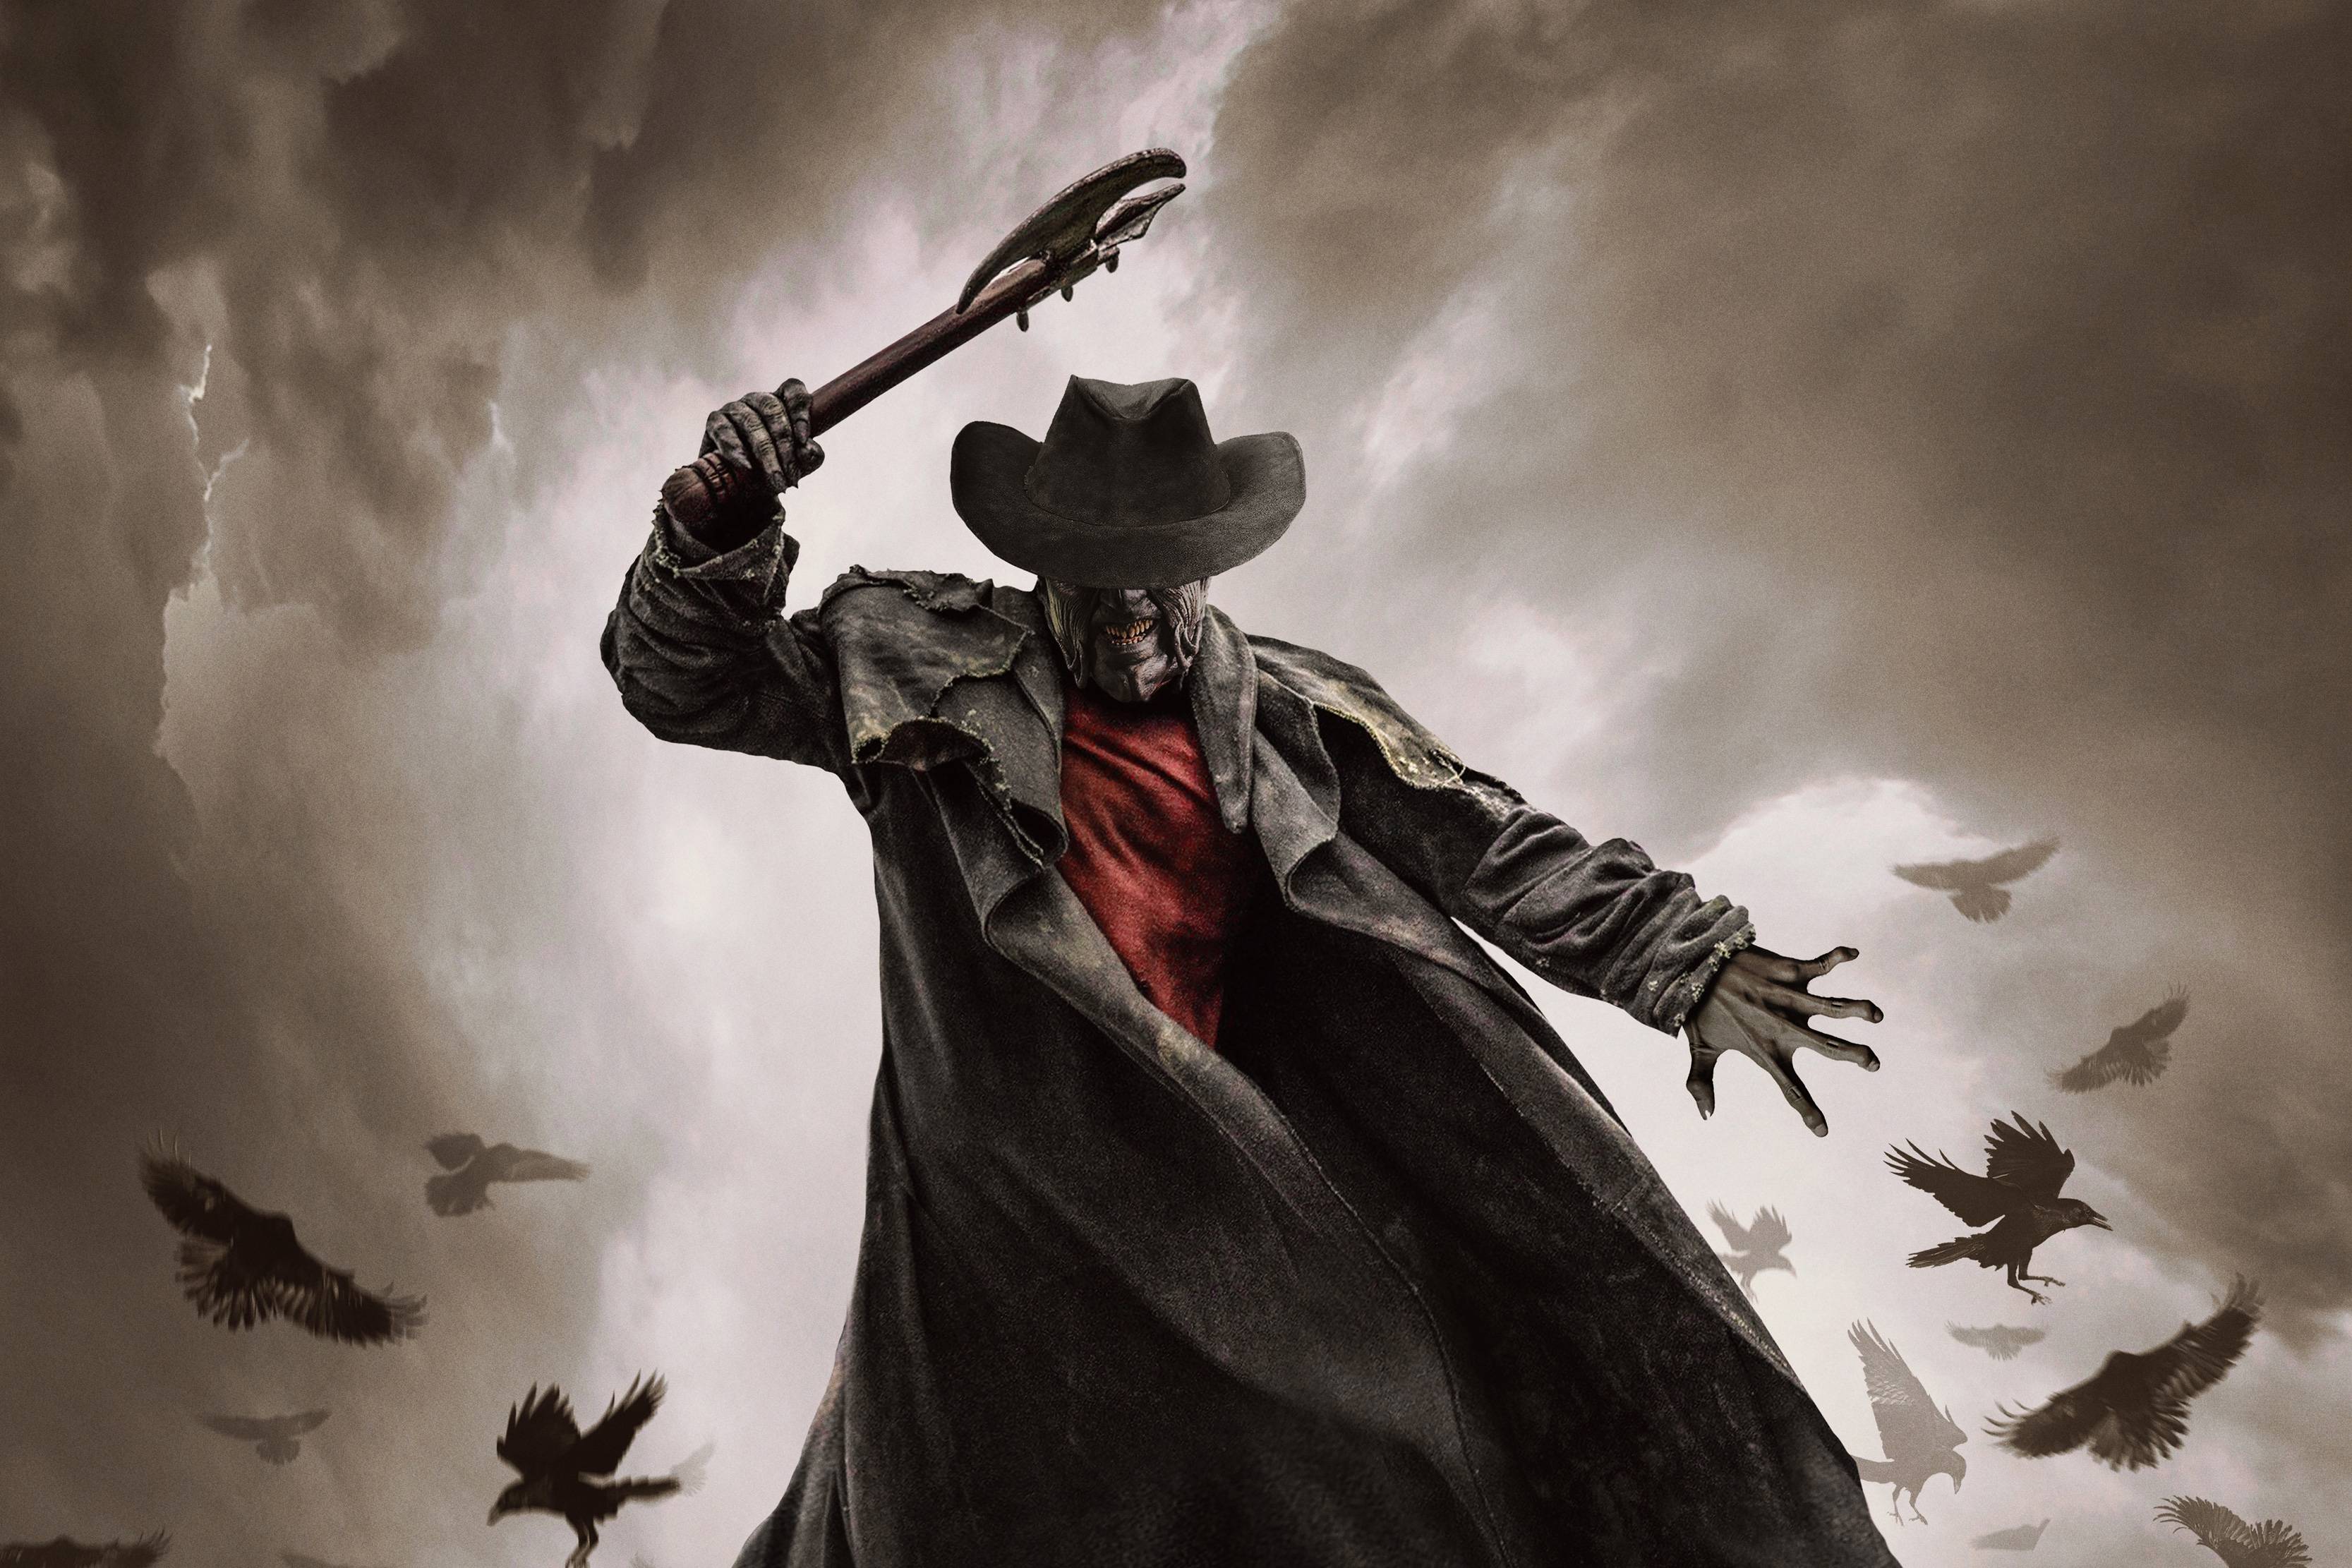 watch jeepers creepers 2 online free without downloading